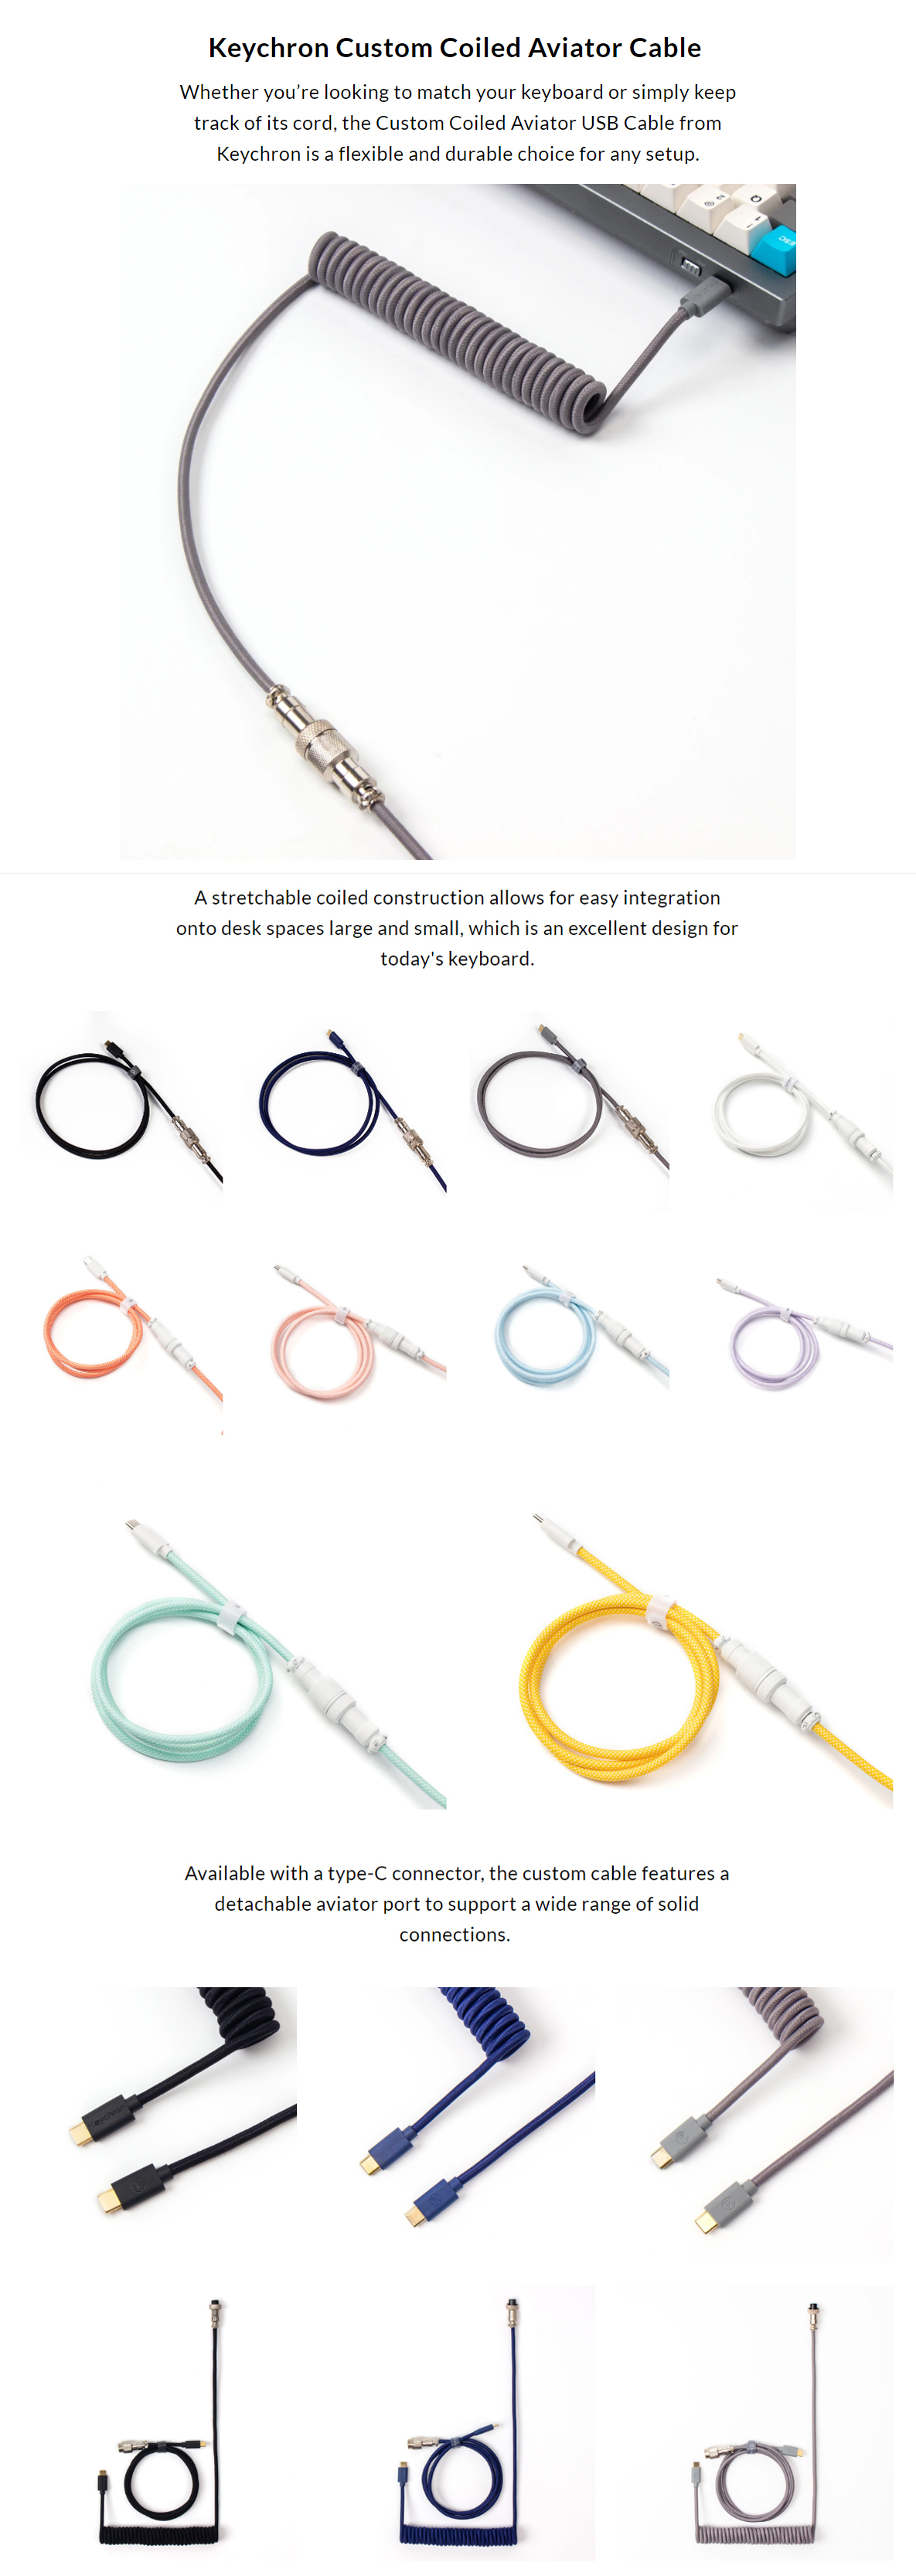 A large marketing image providing additional information about the product Keychron Custom Coiled Aviator Cable - Yellow - Additional alt info not provided